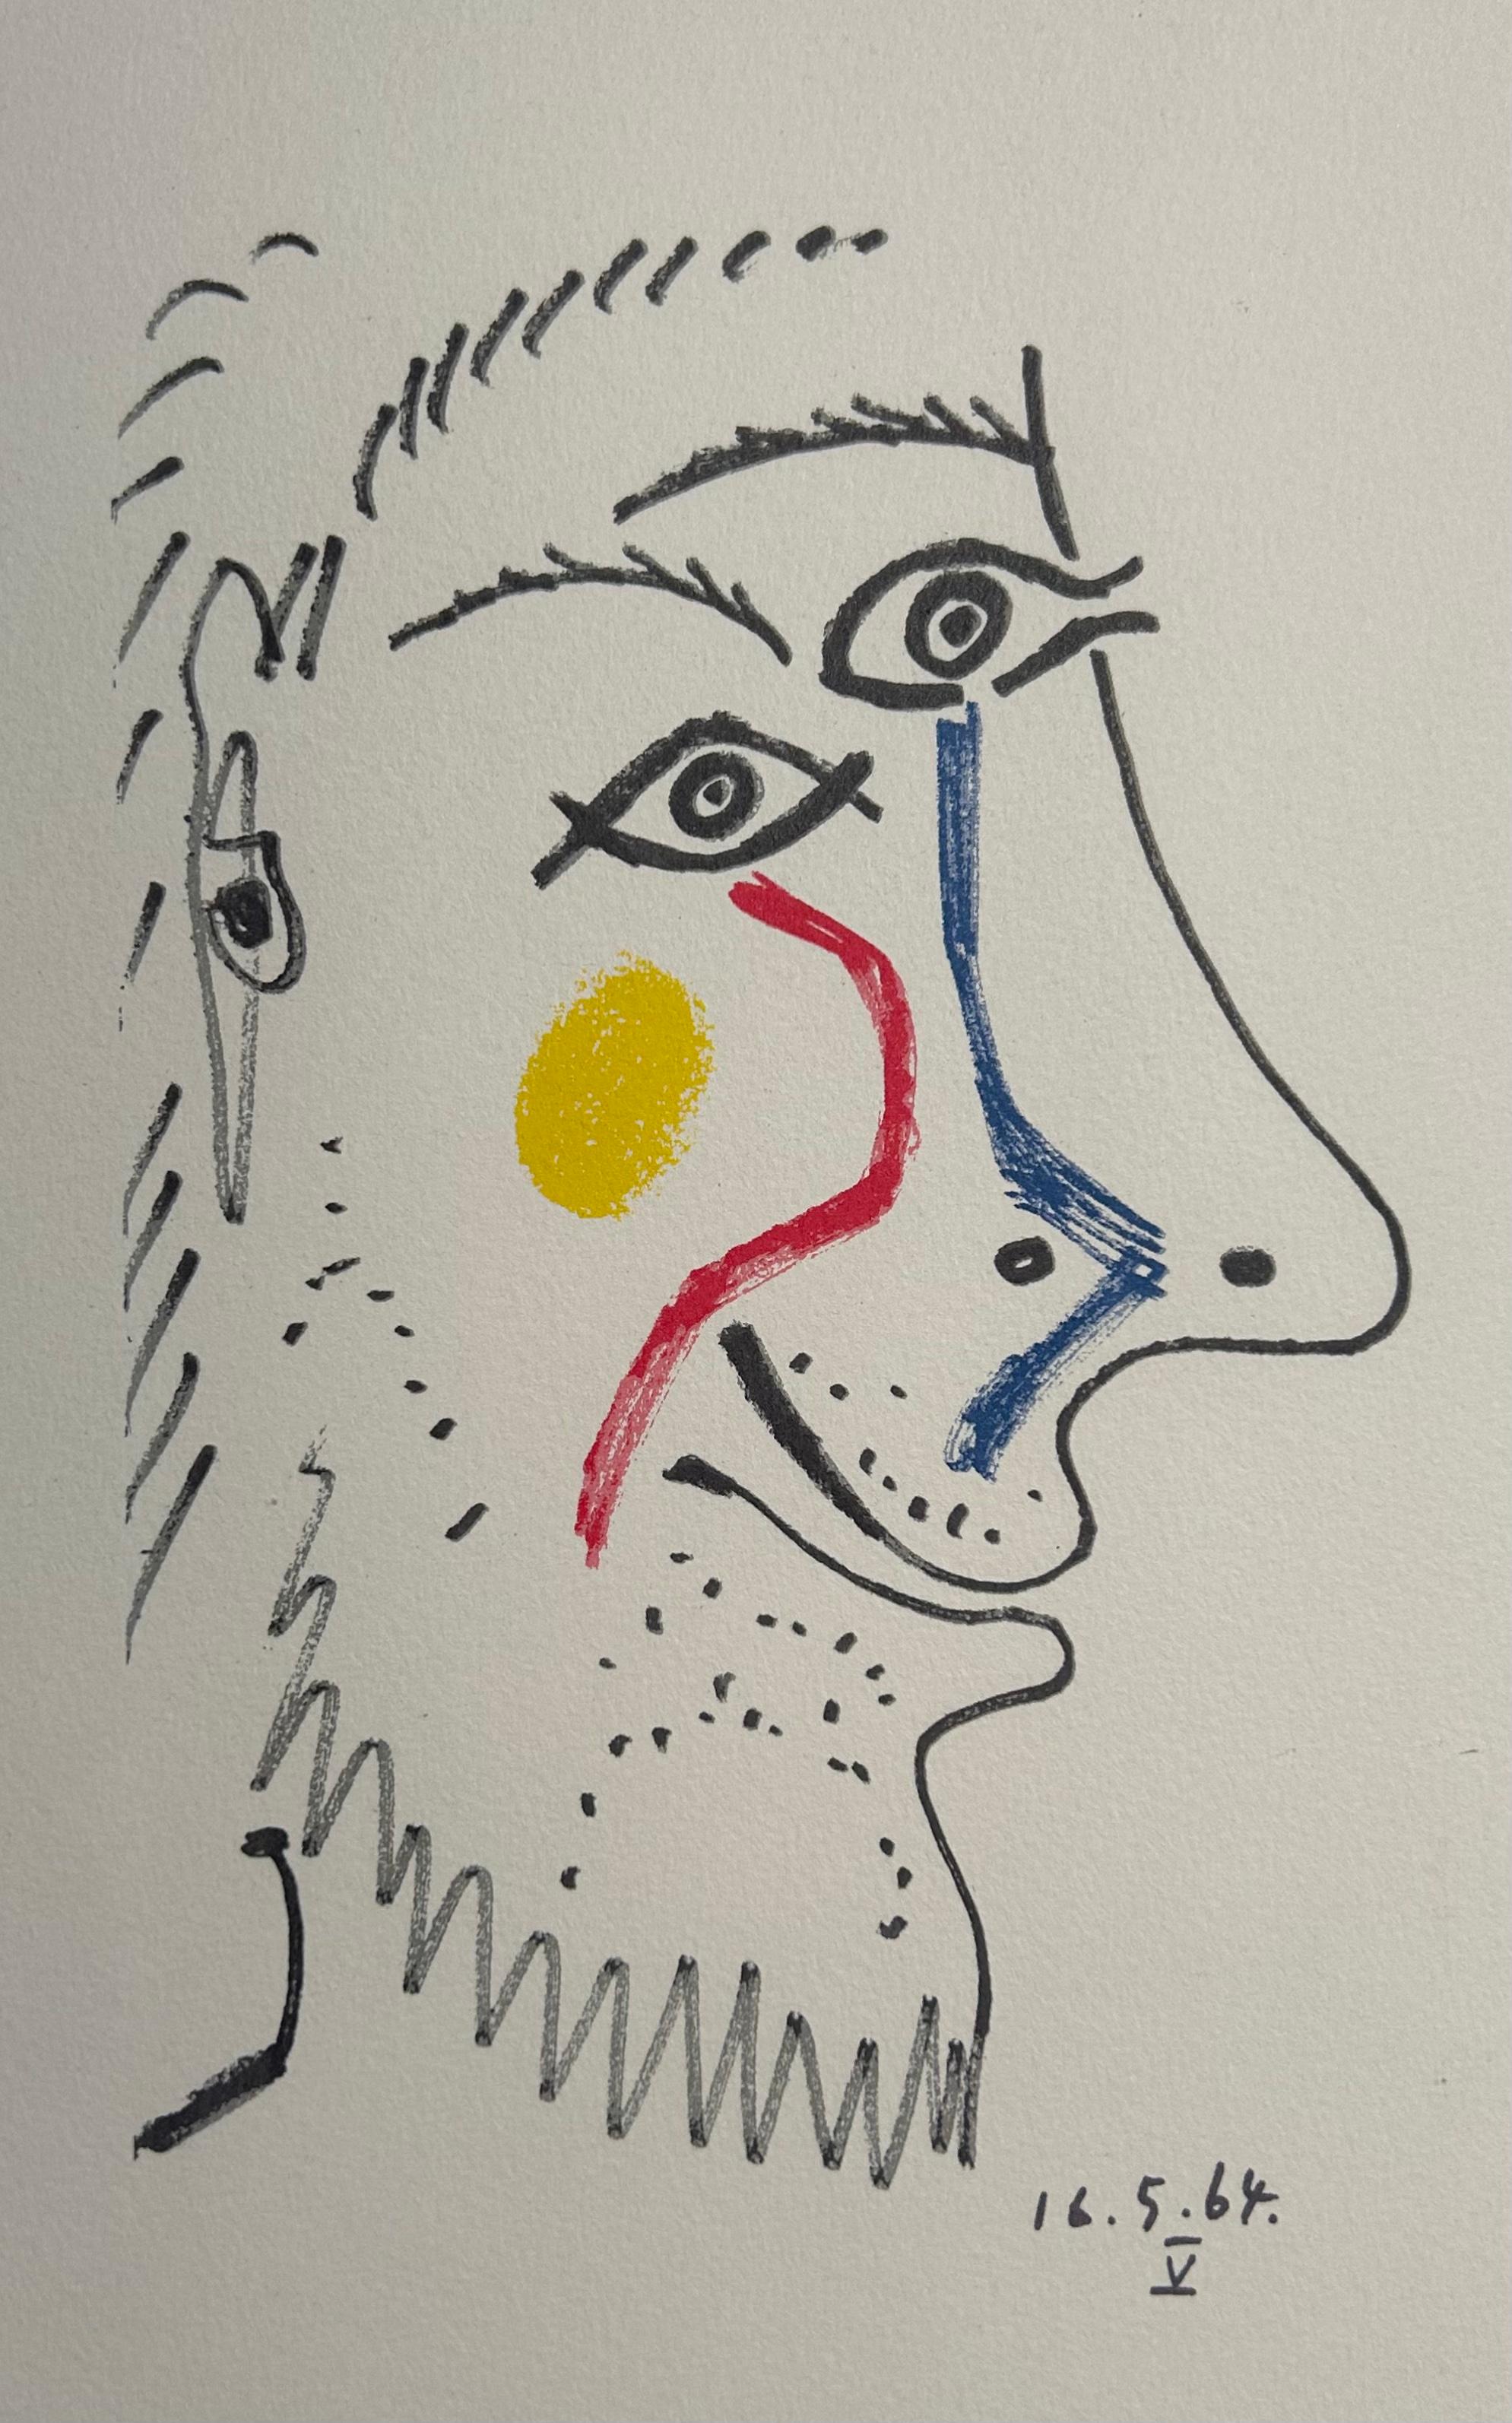 Picasso's portrait of a man, adapted from a drawing made in 1964 into a lithograph that grabs attention with its unique line work and primary colour application. 

The lithograph comes from the sketchbook Le Goût du Bonheur (The Taste of Happiness):